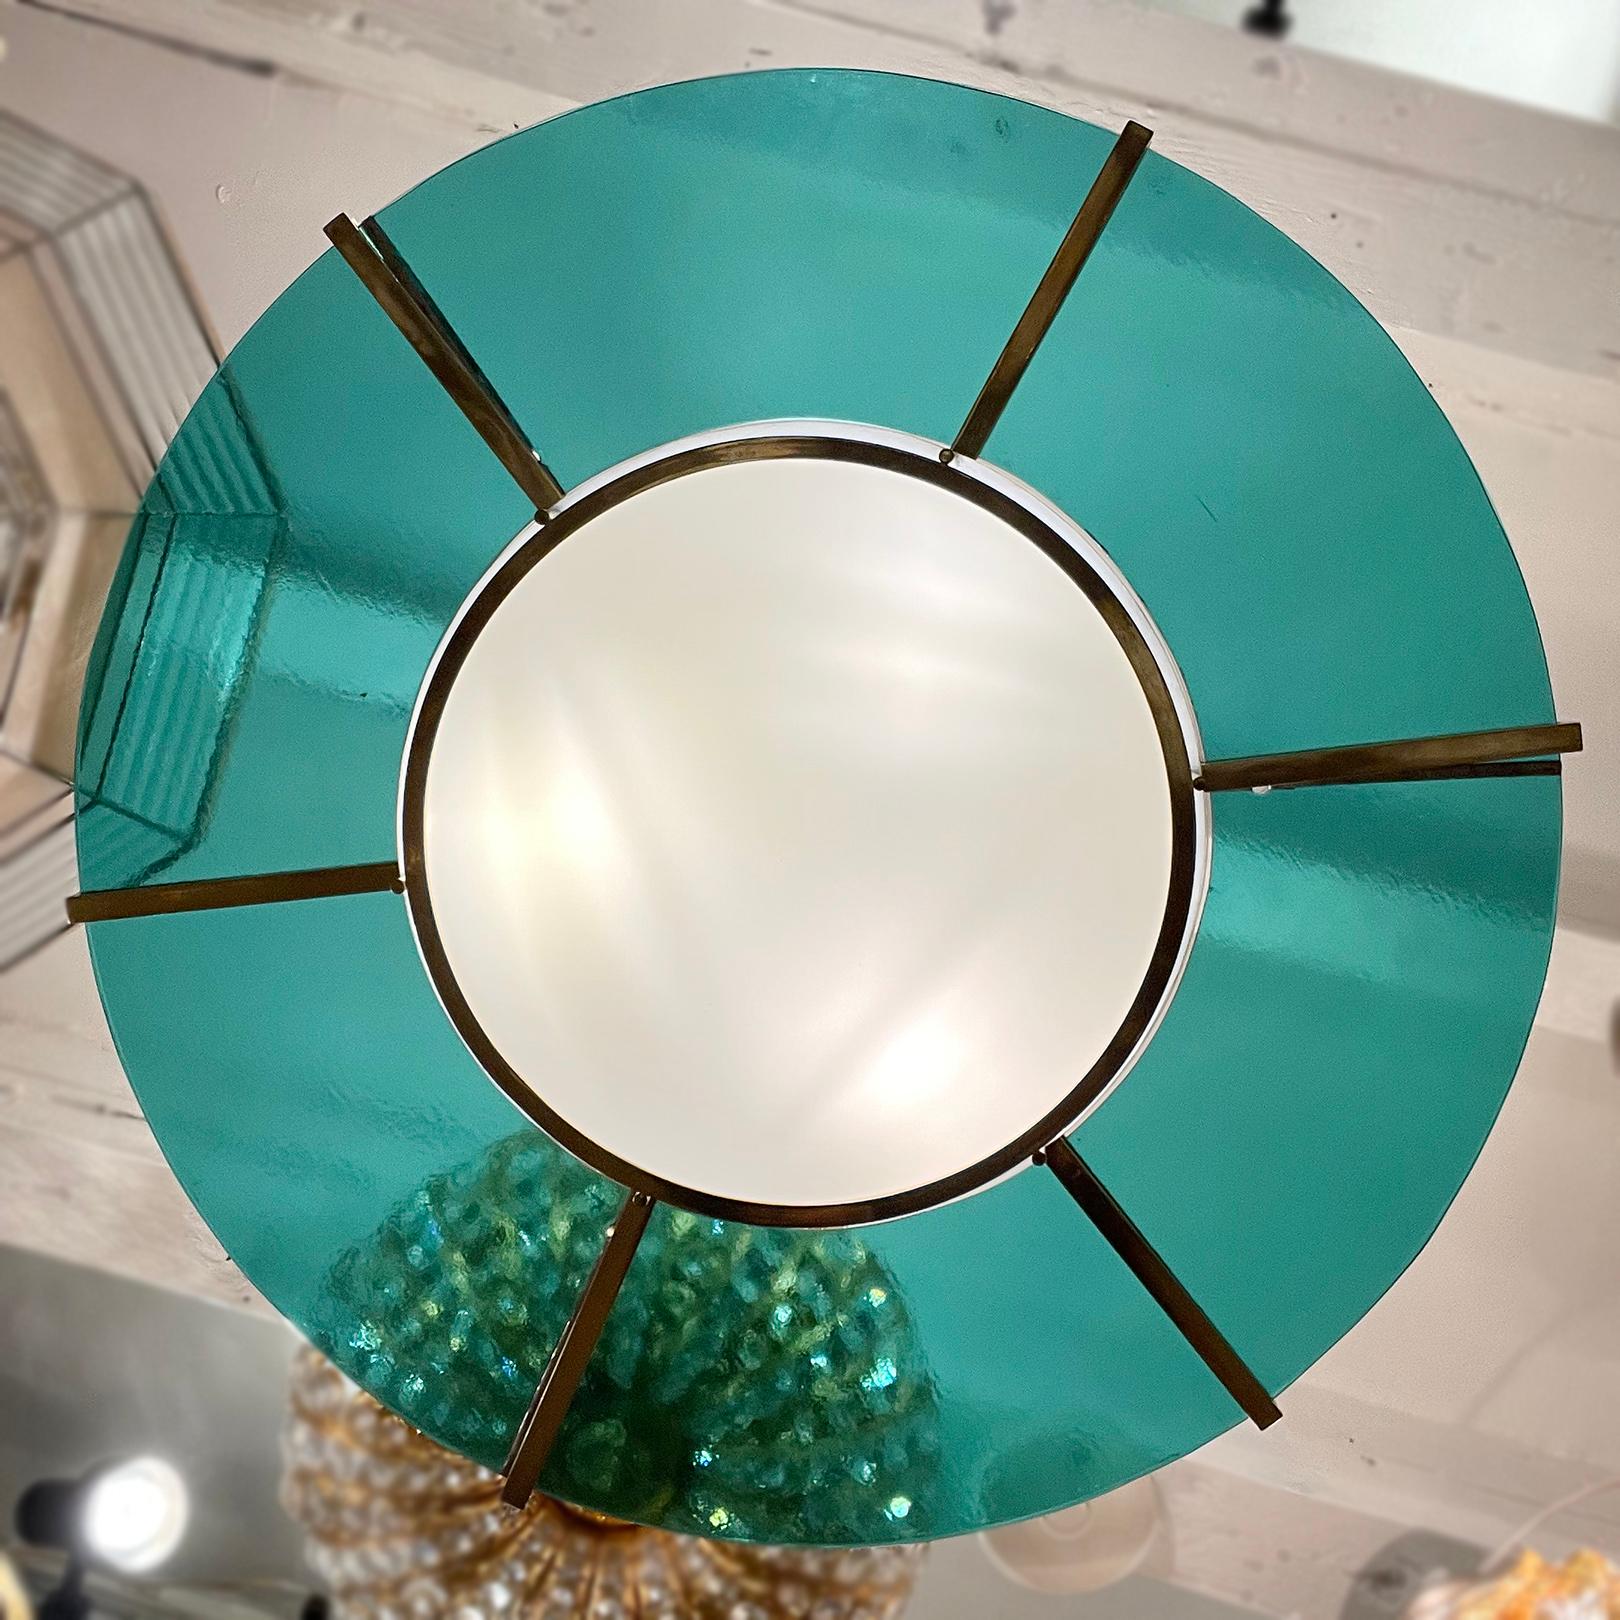 A pair of 1960's Italian light fixtures with 6 interior lights. Polished bronze frame with turquoise glass inset. Sold individually.

Measurements:
Diameter: 32